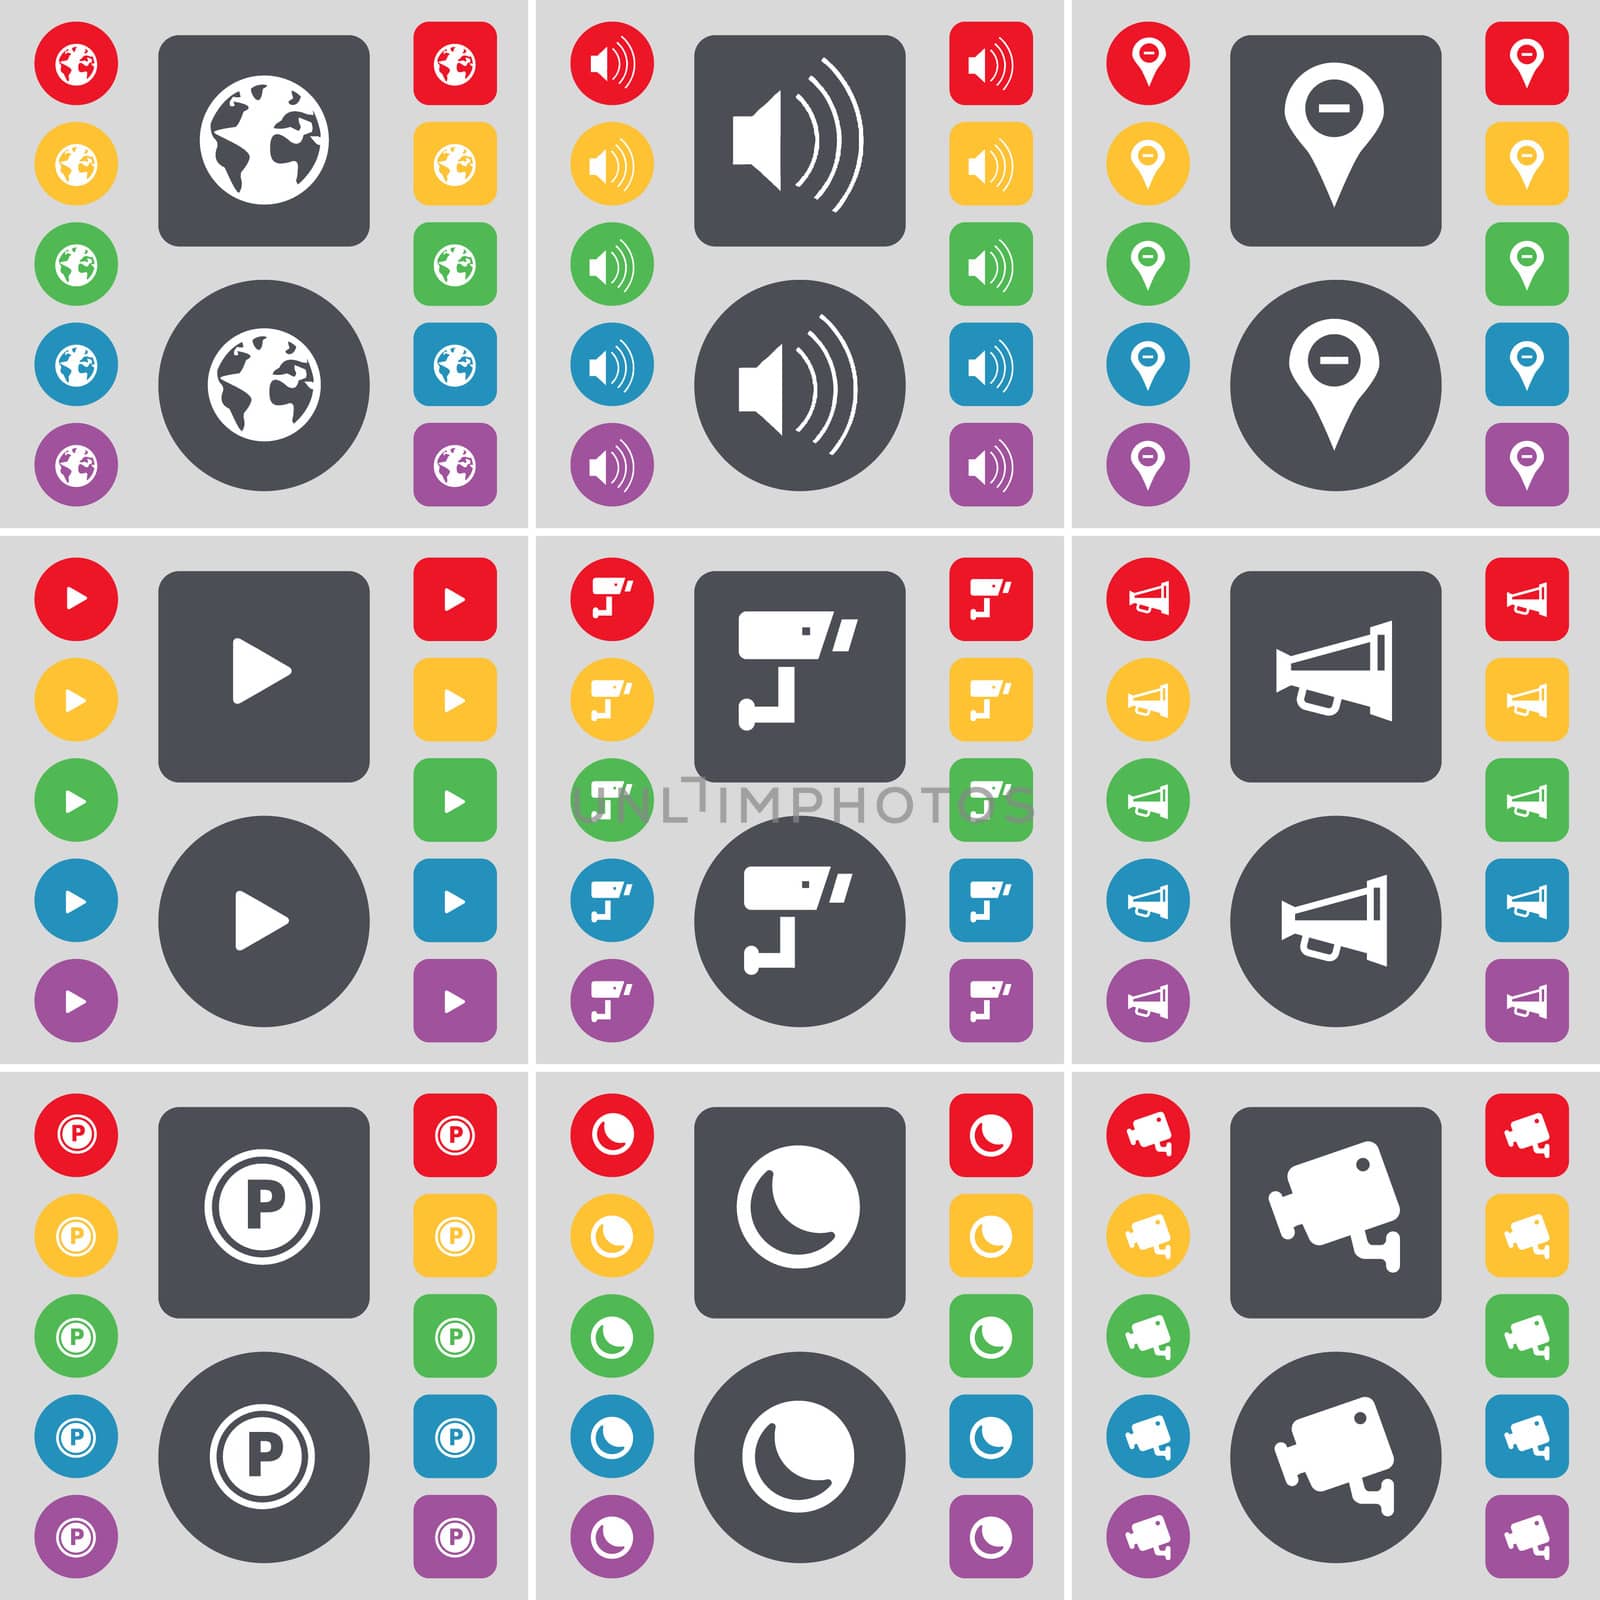 Earth, Sound, Checkpoint, Media play, CCTV, Megaphone, Parking, Moon, CCTV icon symbol. A large set of flat, colored buttons for your design.  by serhii_lohvyniuk